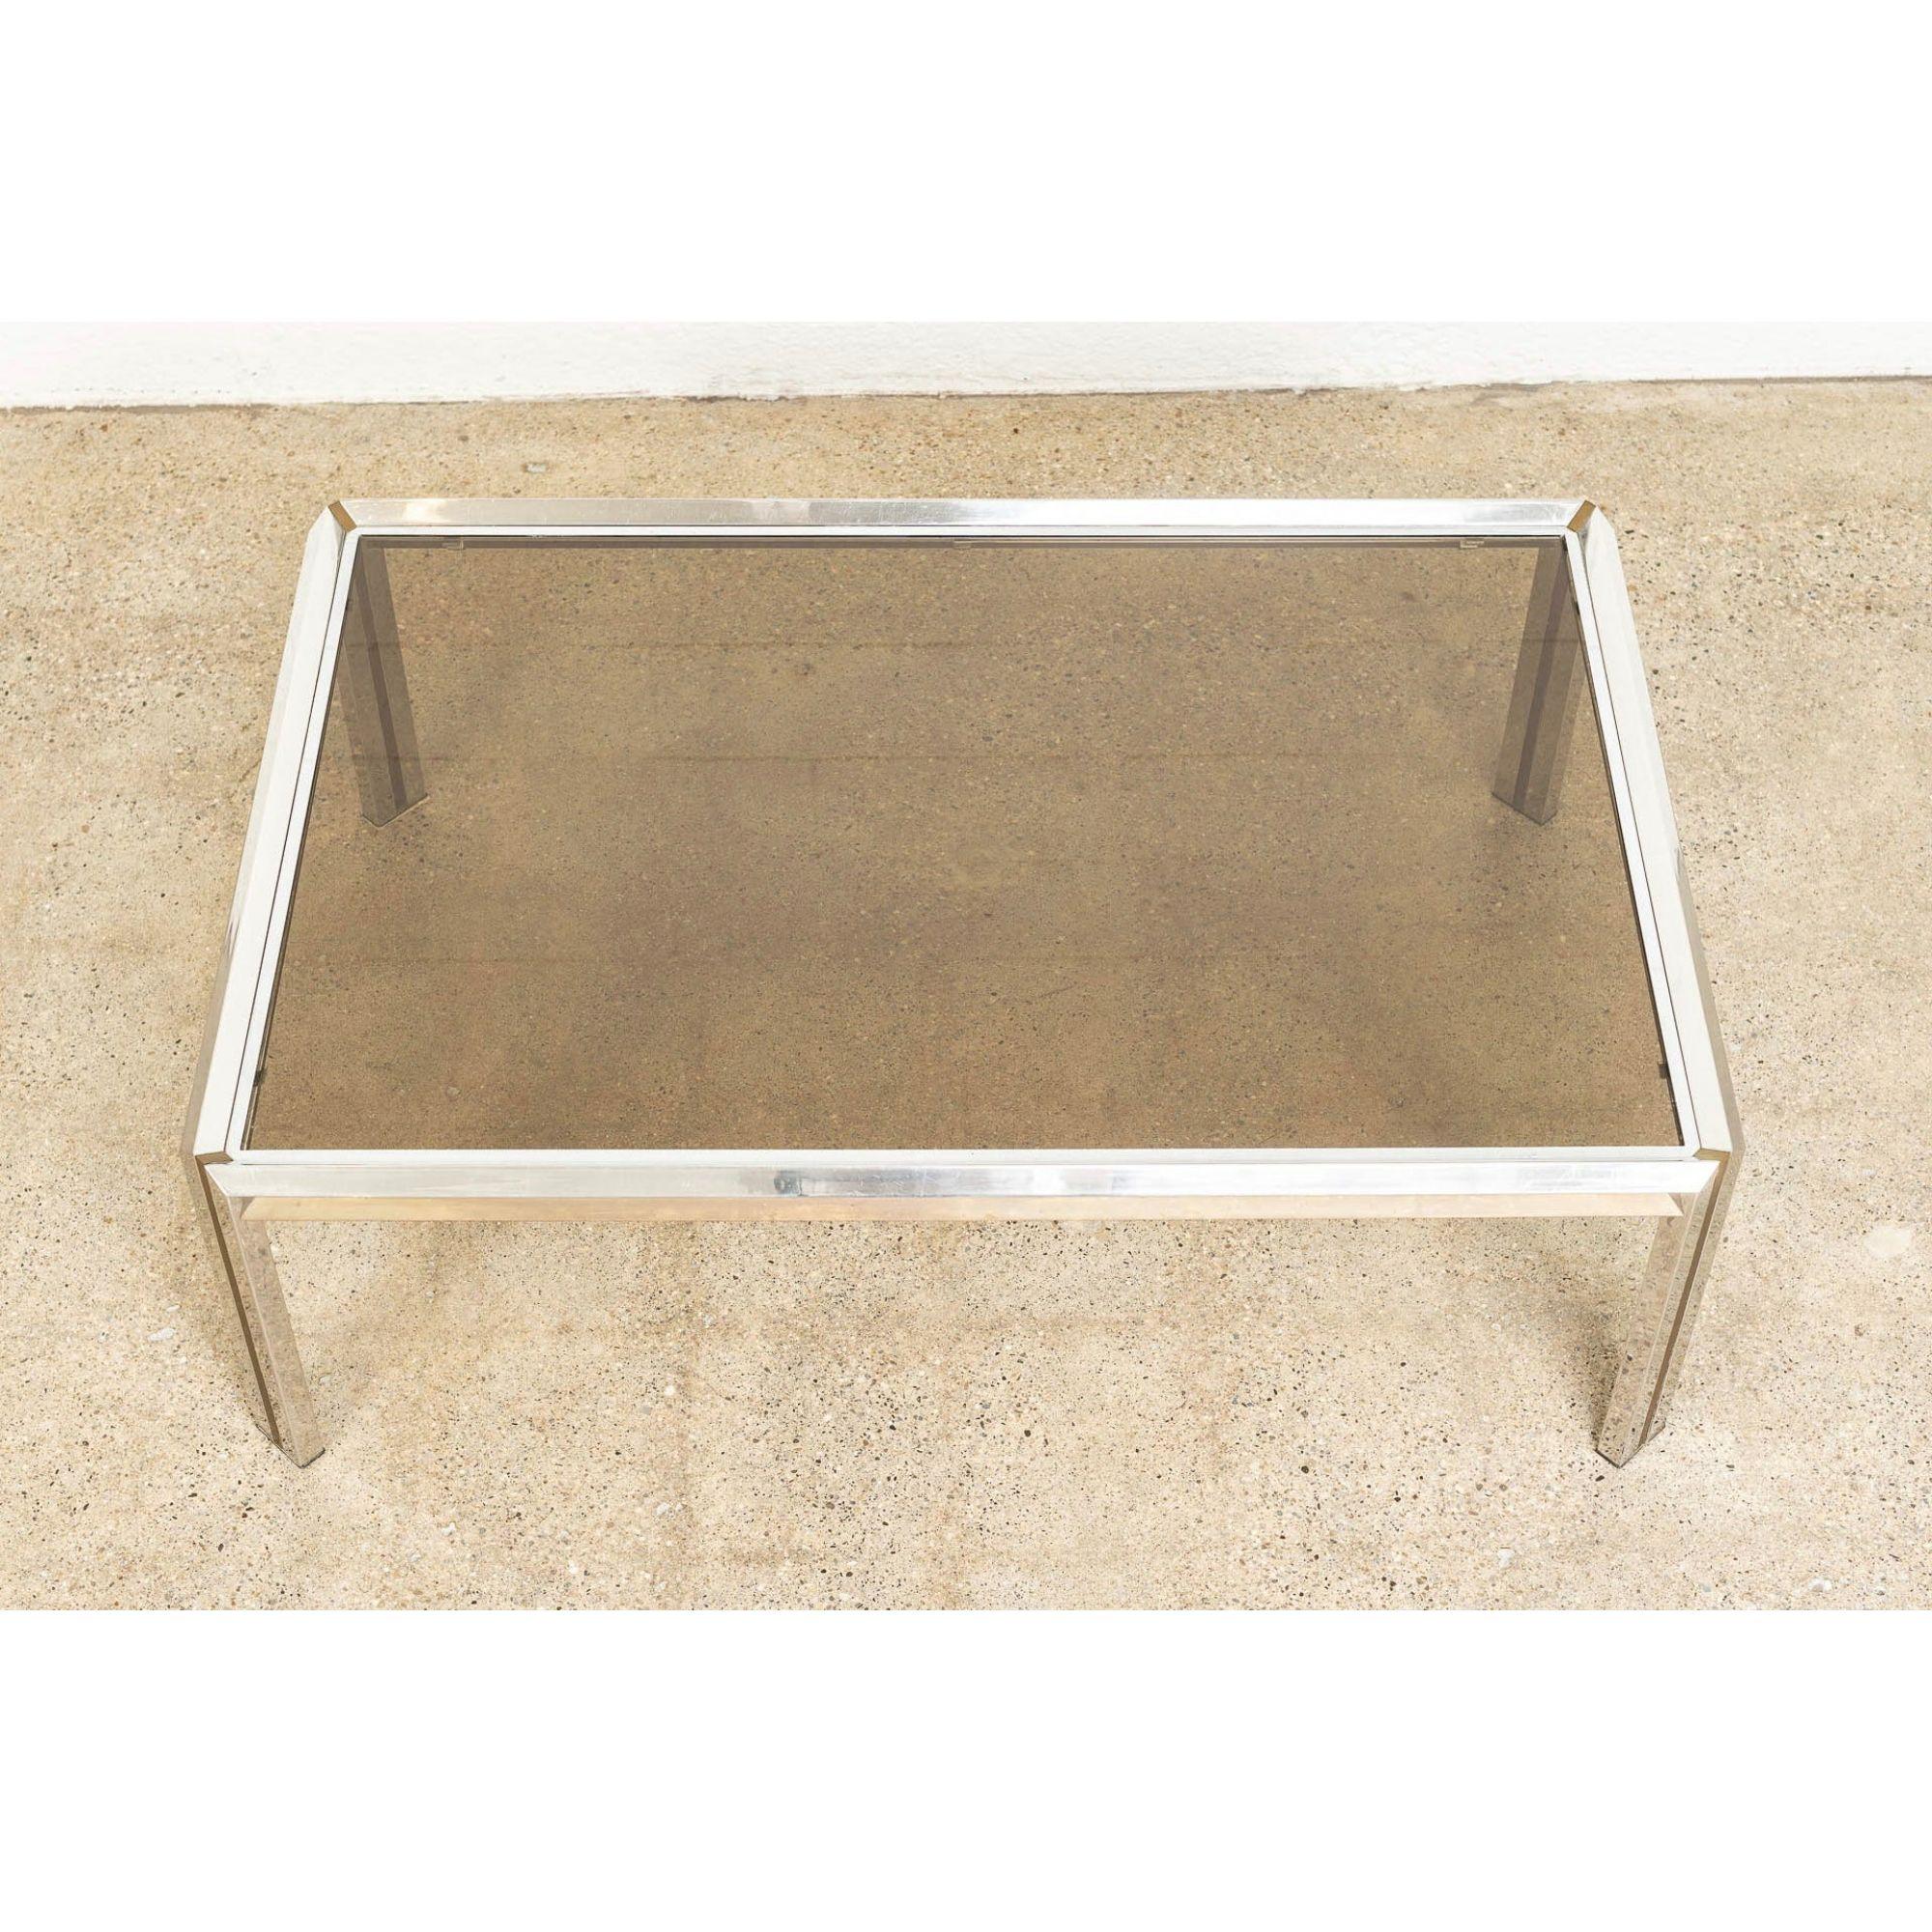 Mid-Century Modern Coffee Table in Chrome, Brass and Glass, 1970s For Sale 2